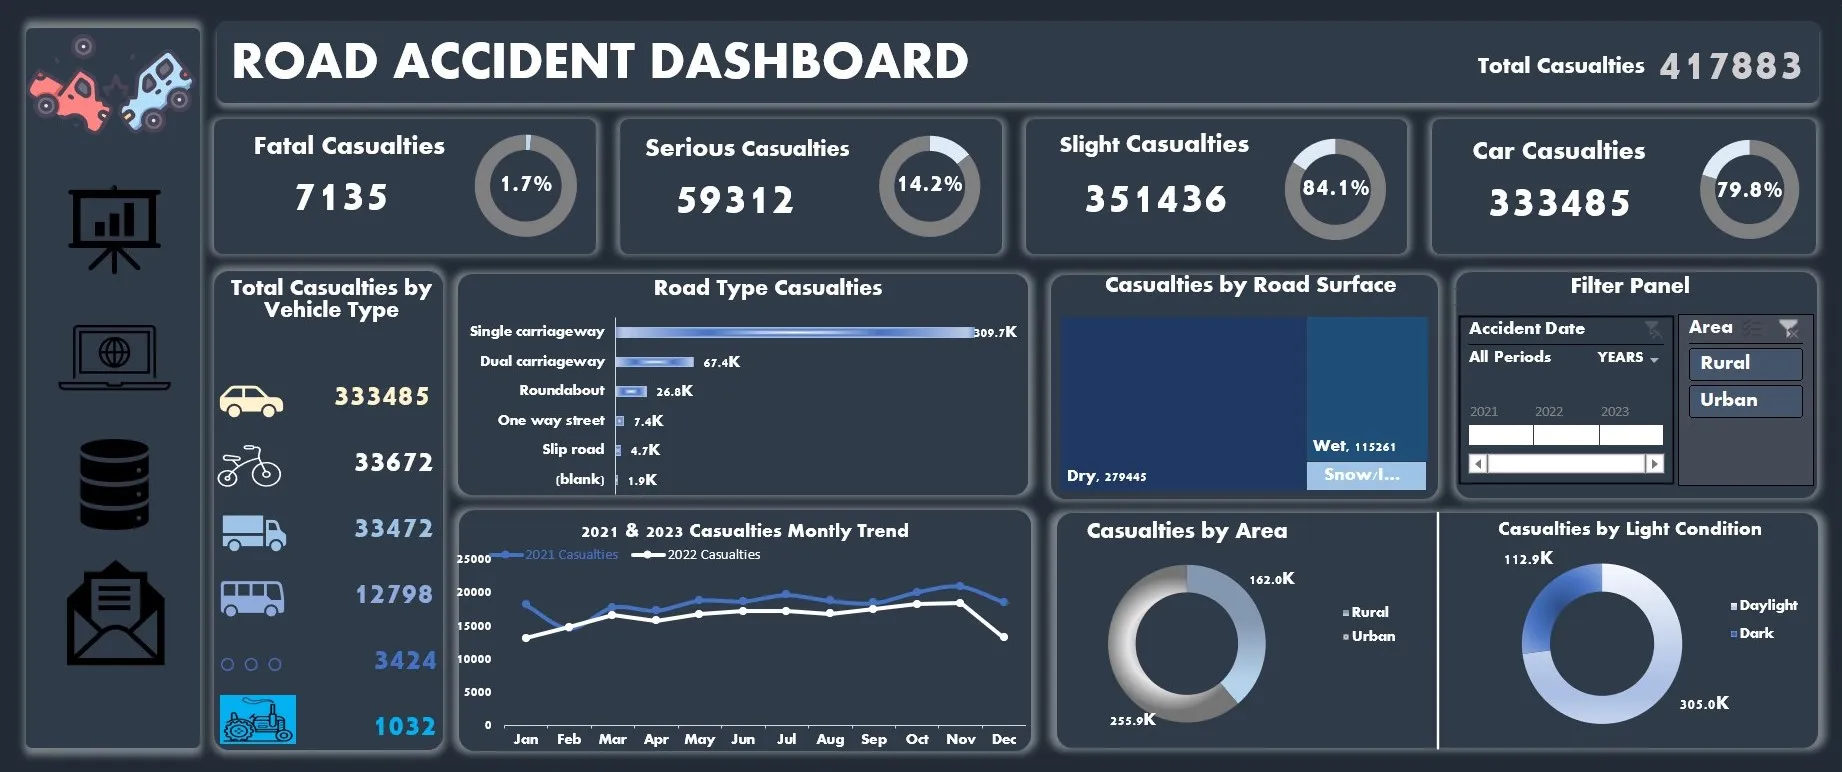 road accident dashboard